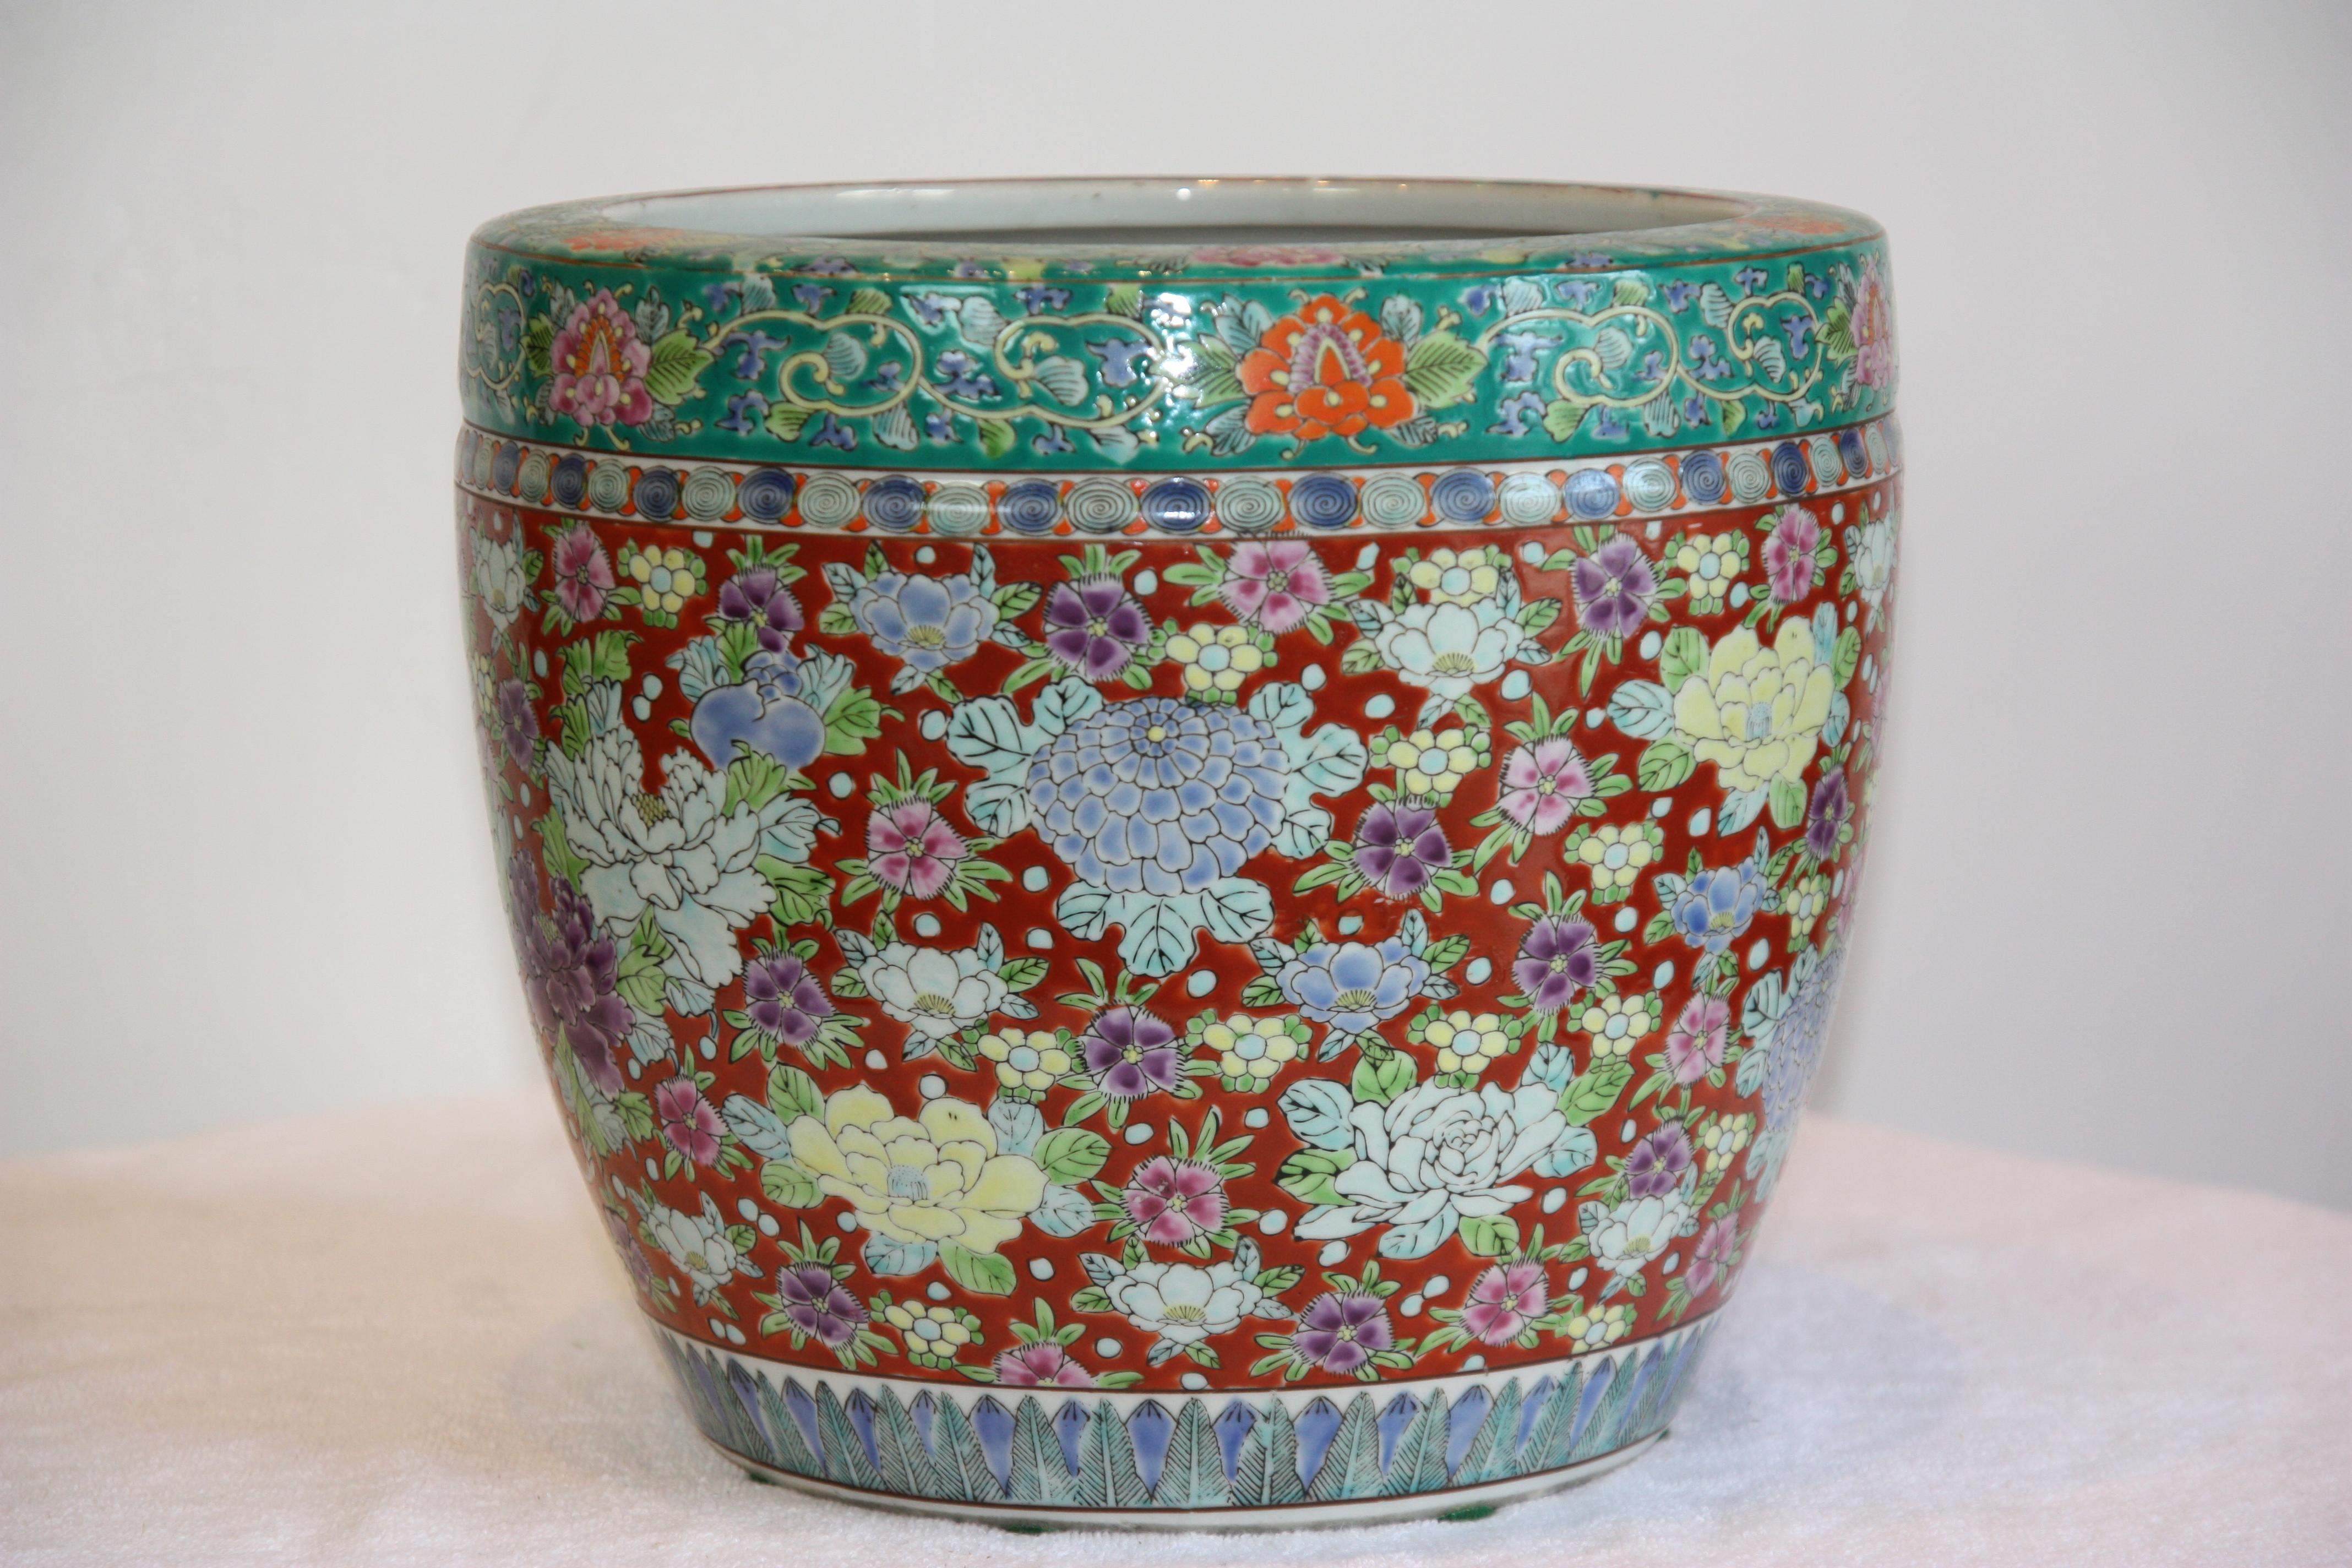 Lovely Pair of Late 19th Century Hand-Painted, Red and Green Jardinières (Chinesischer Export)